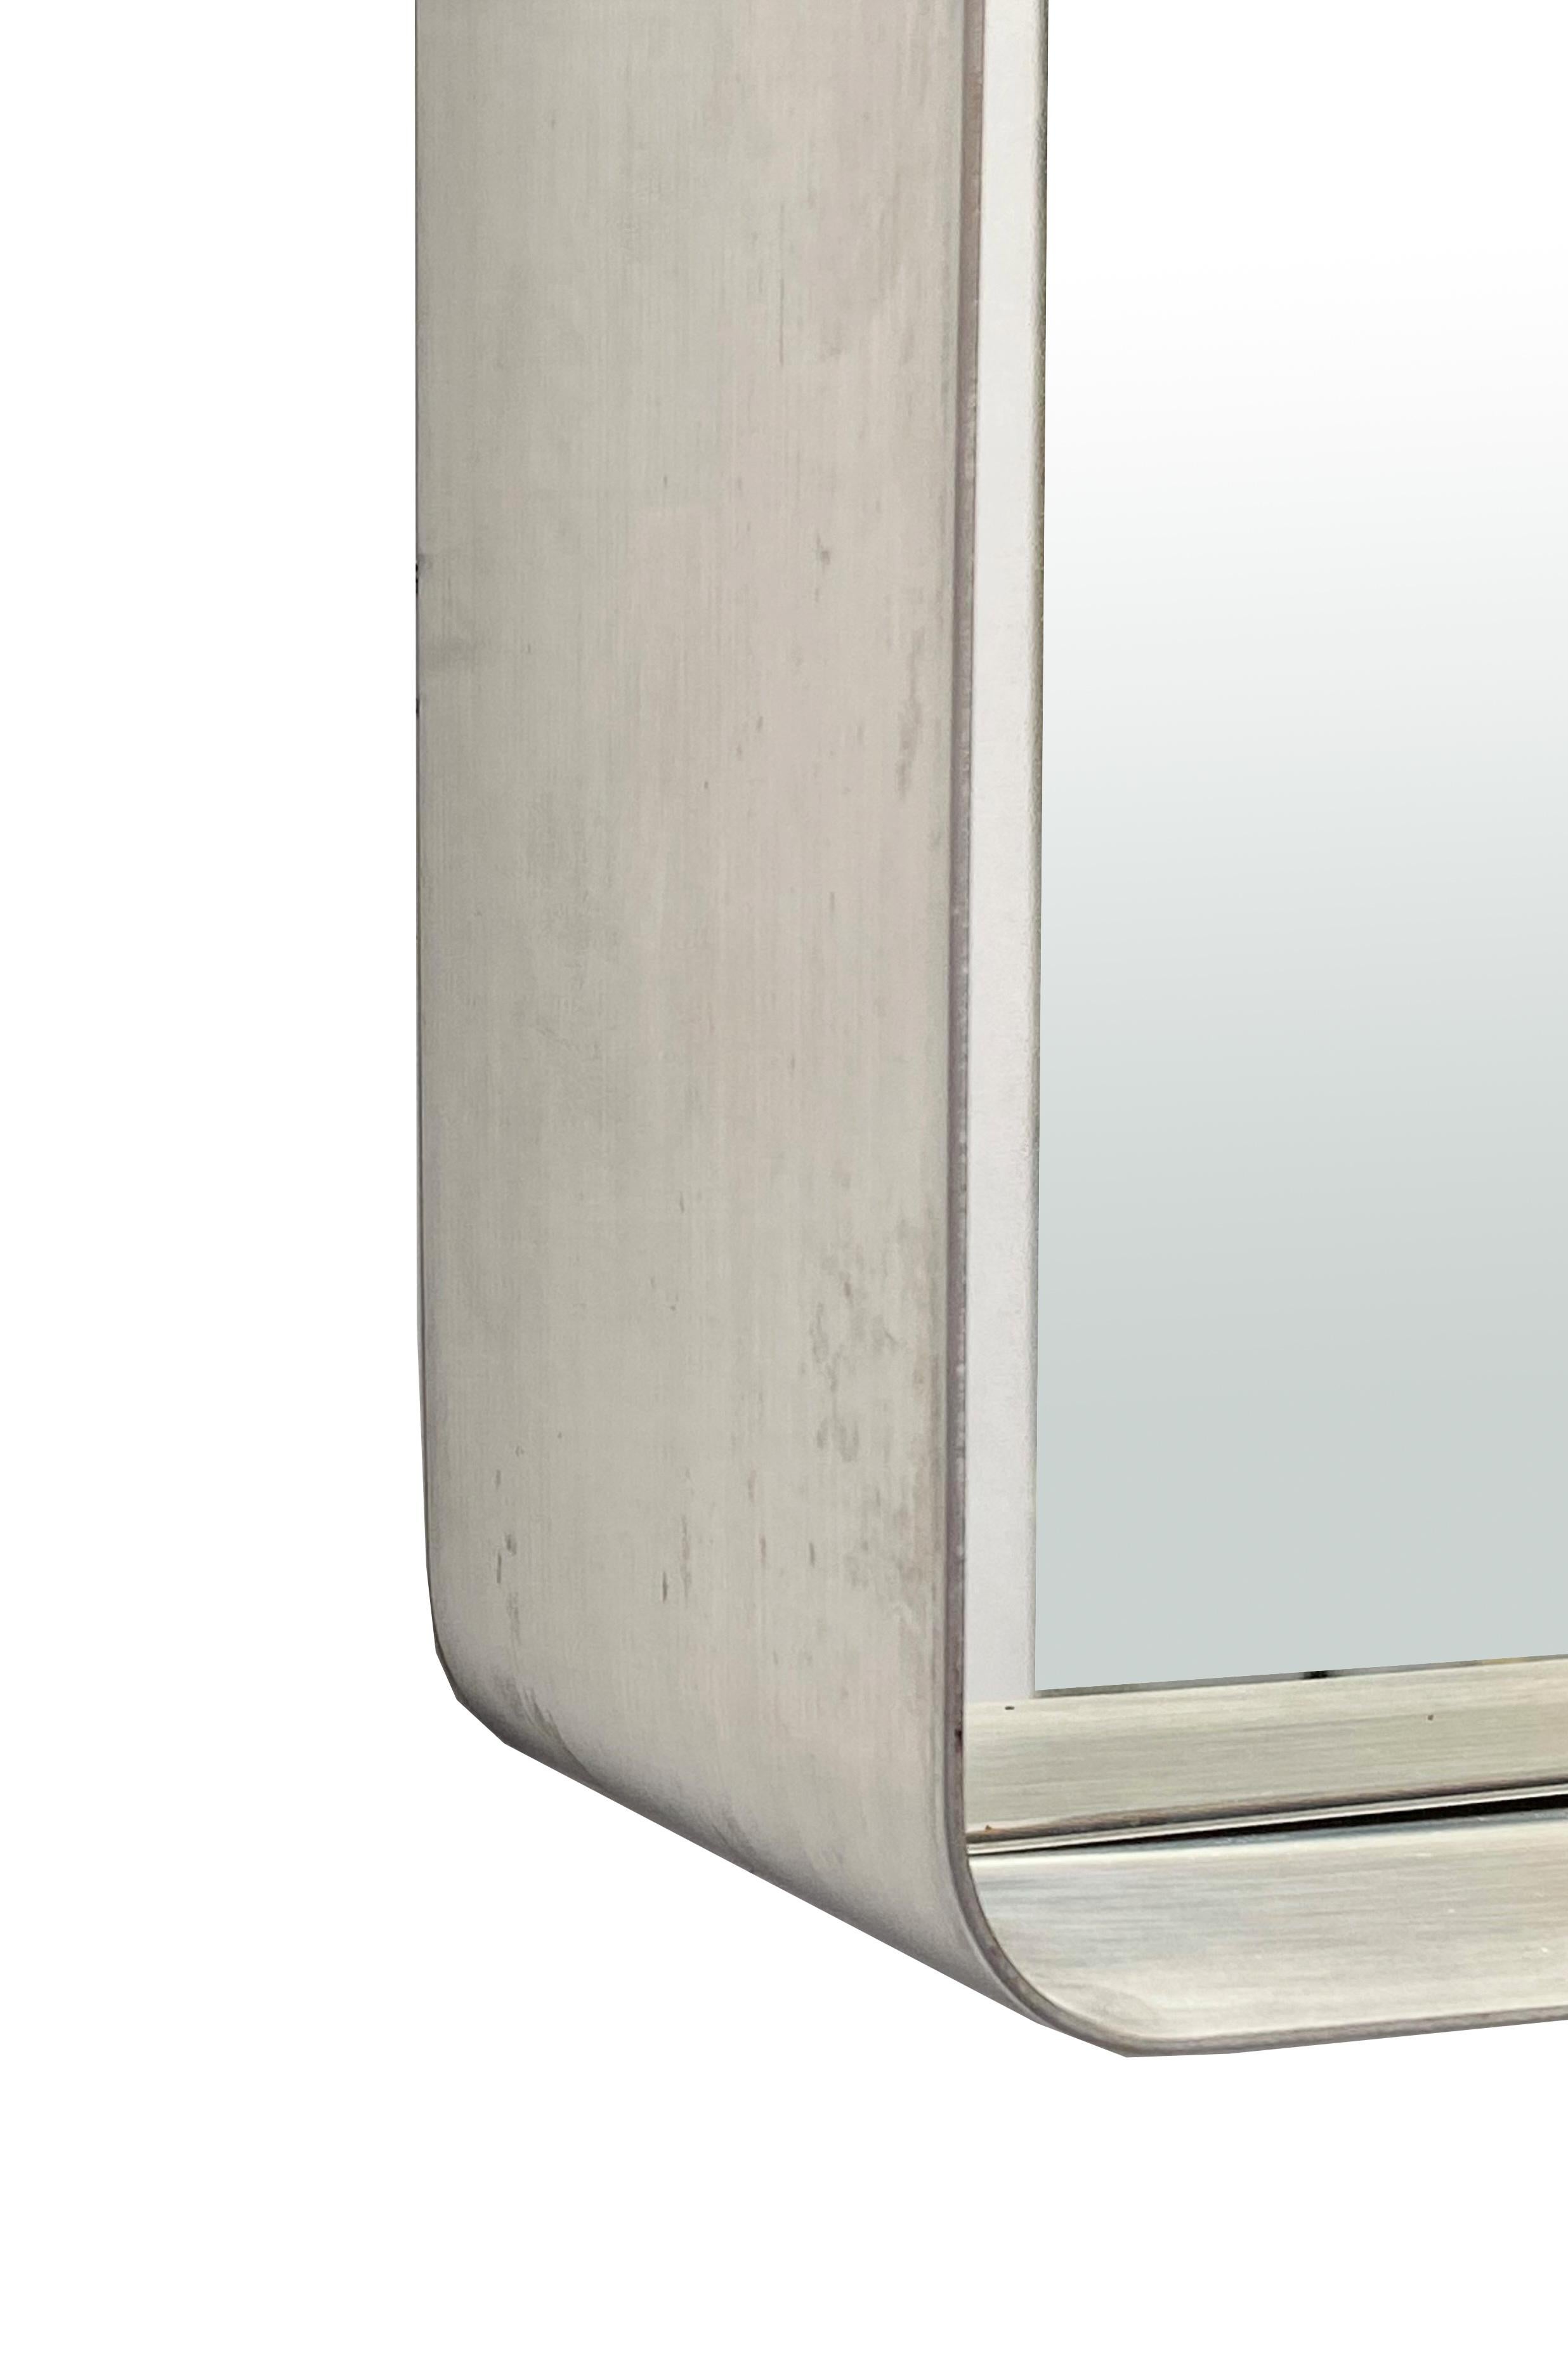 Late 20th Century Francois Monnet Style Rectangular Brushed Stainless Wall Mirror, 1970s